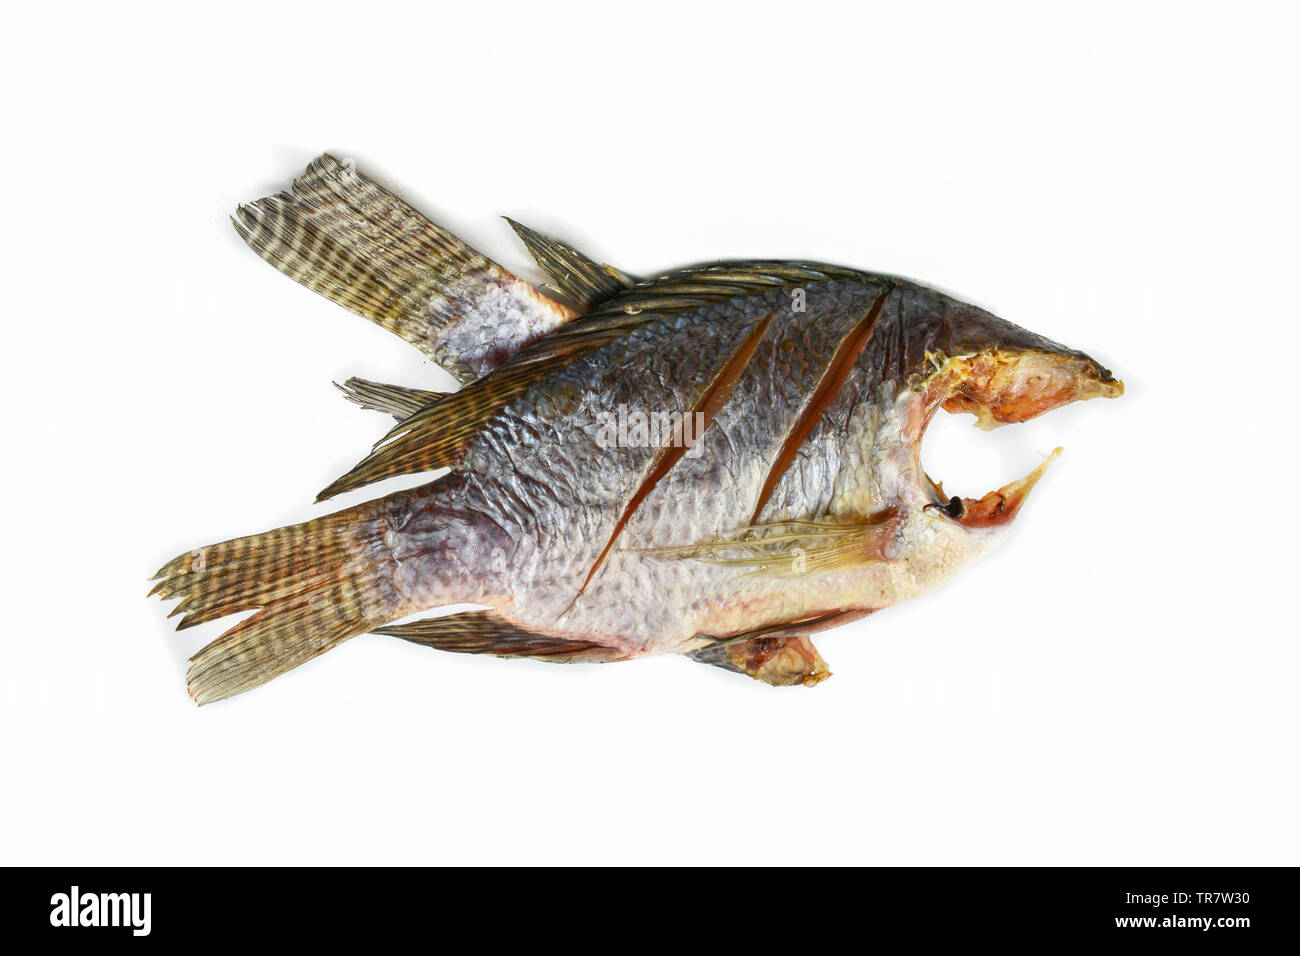 Dried fish tilapia isolated on white background Stock Photo